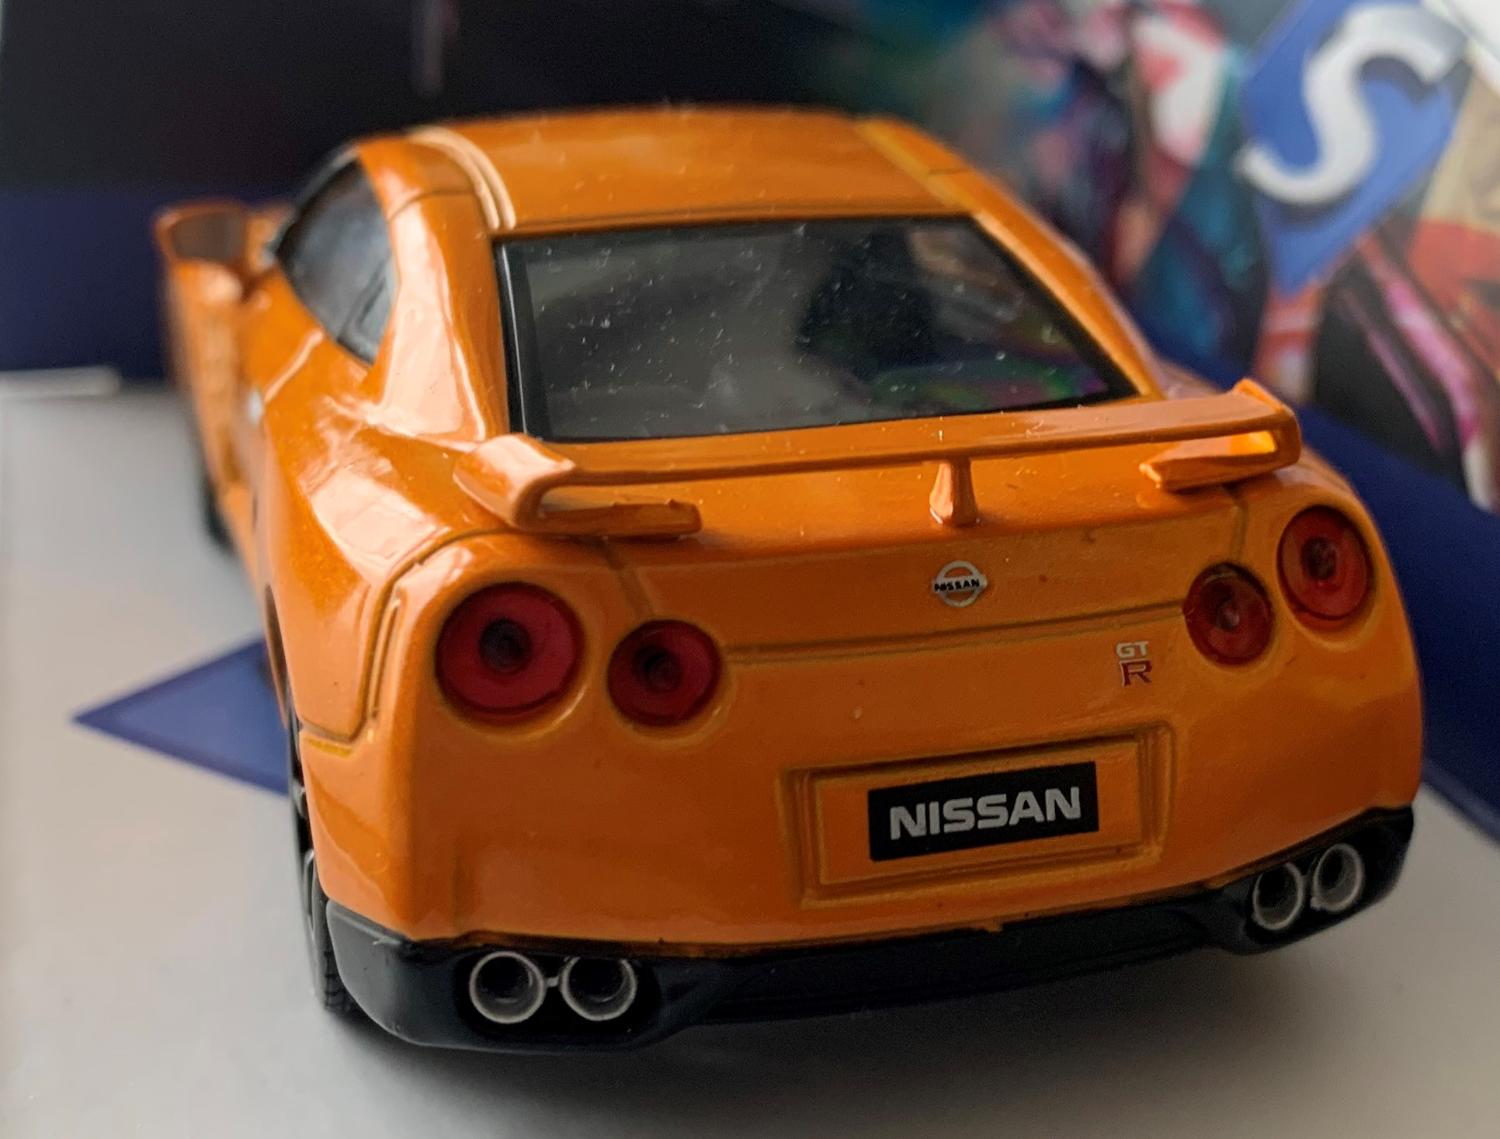 An accurate replica of a Nissan GT-R from 2007 decorated in orange with rear spoiler and black wheels.